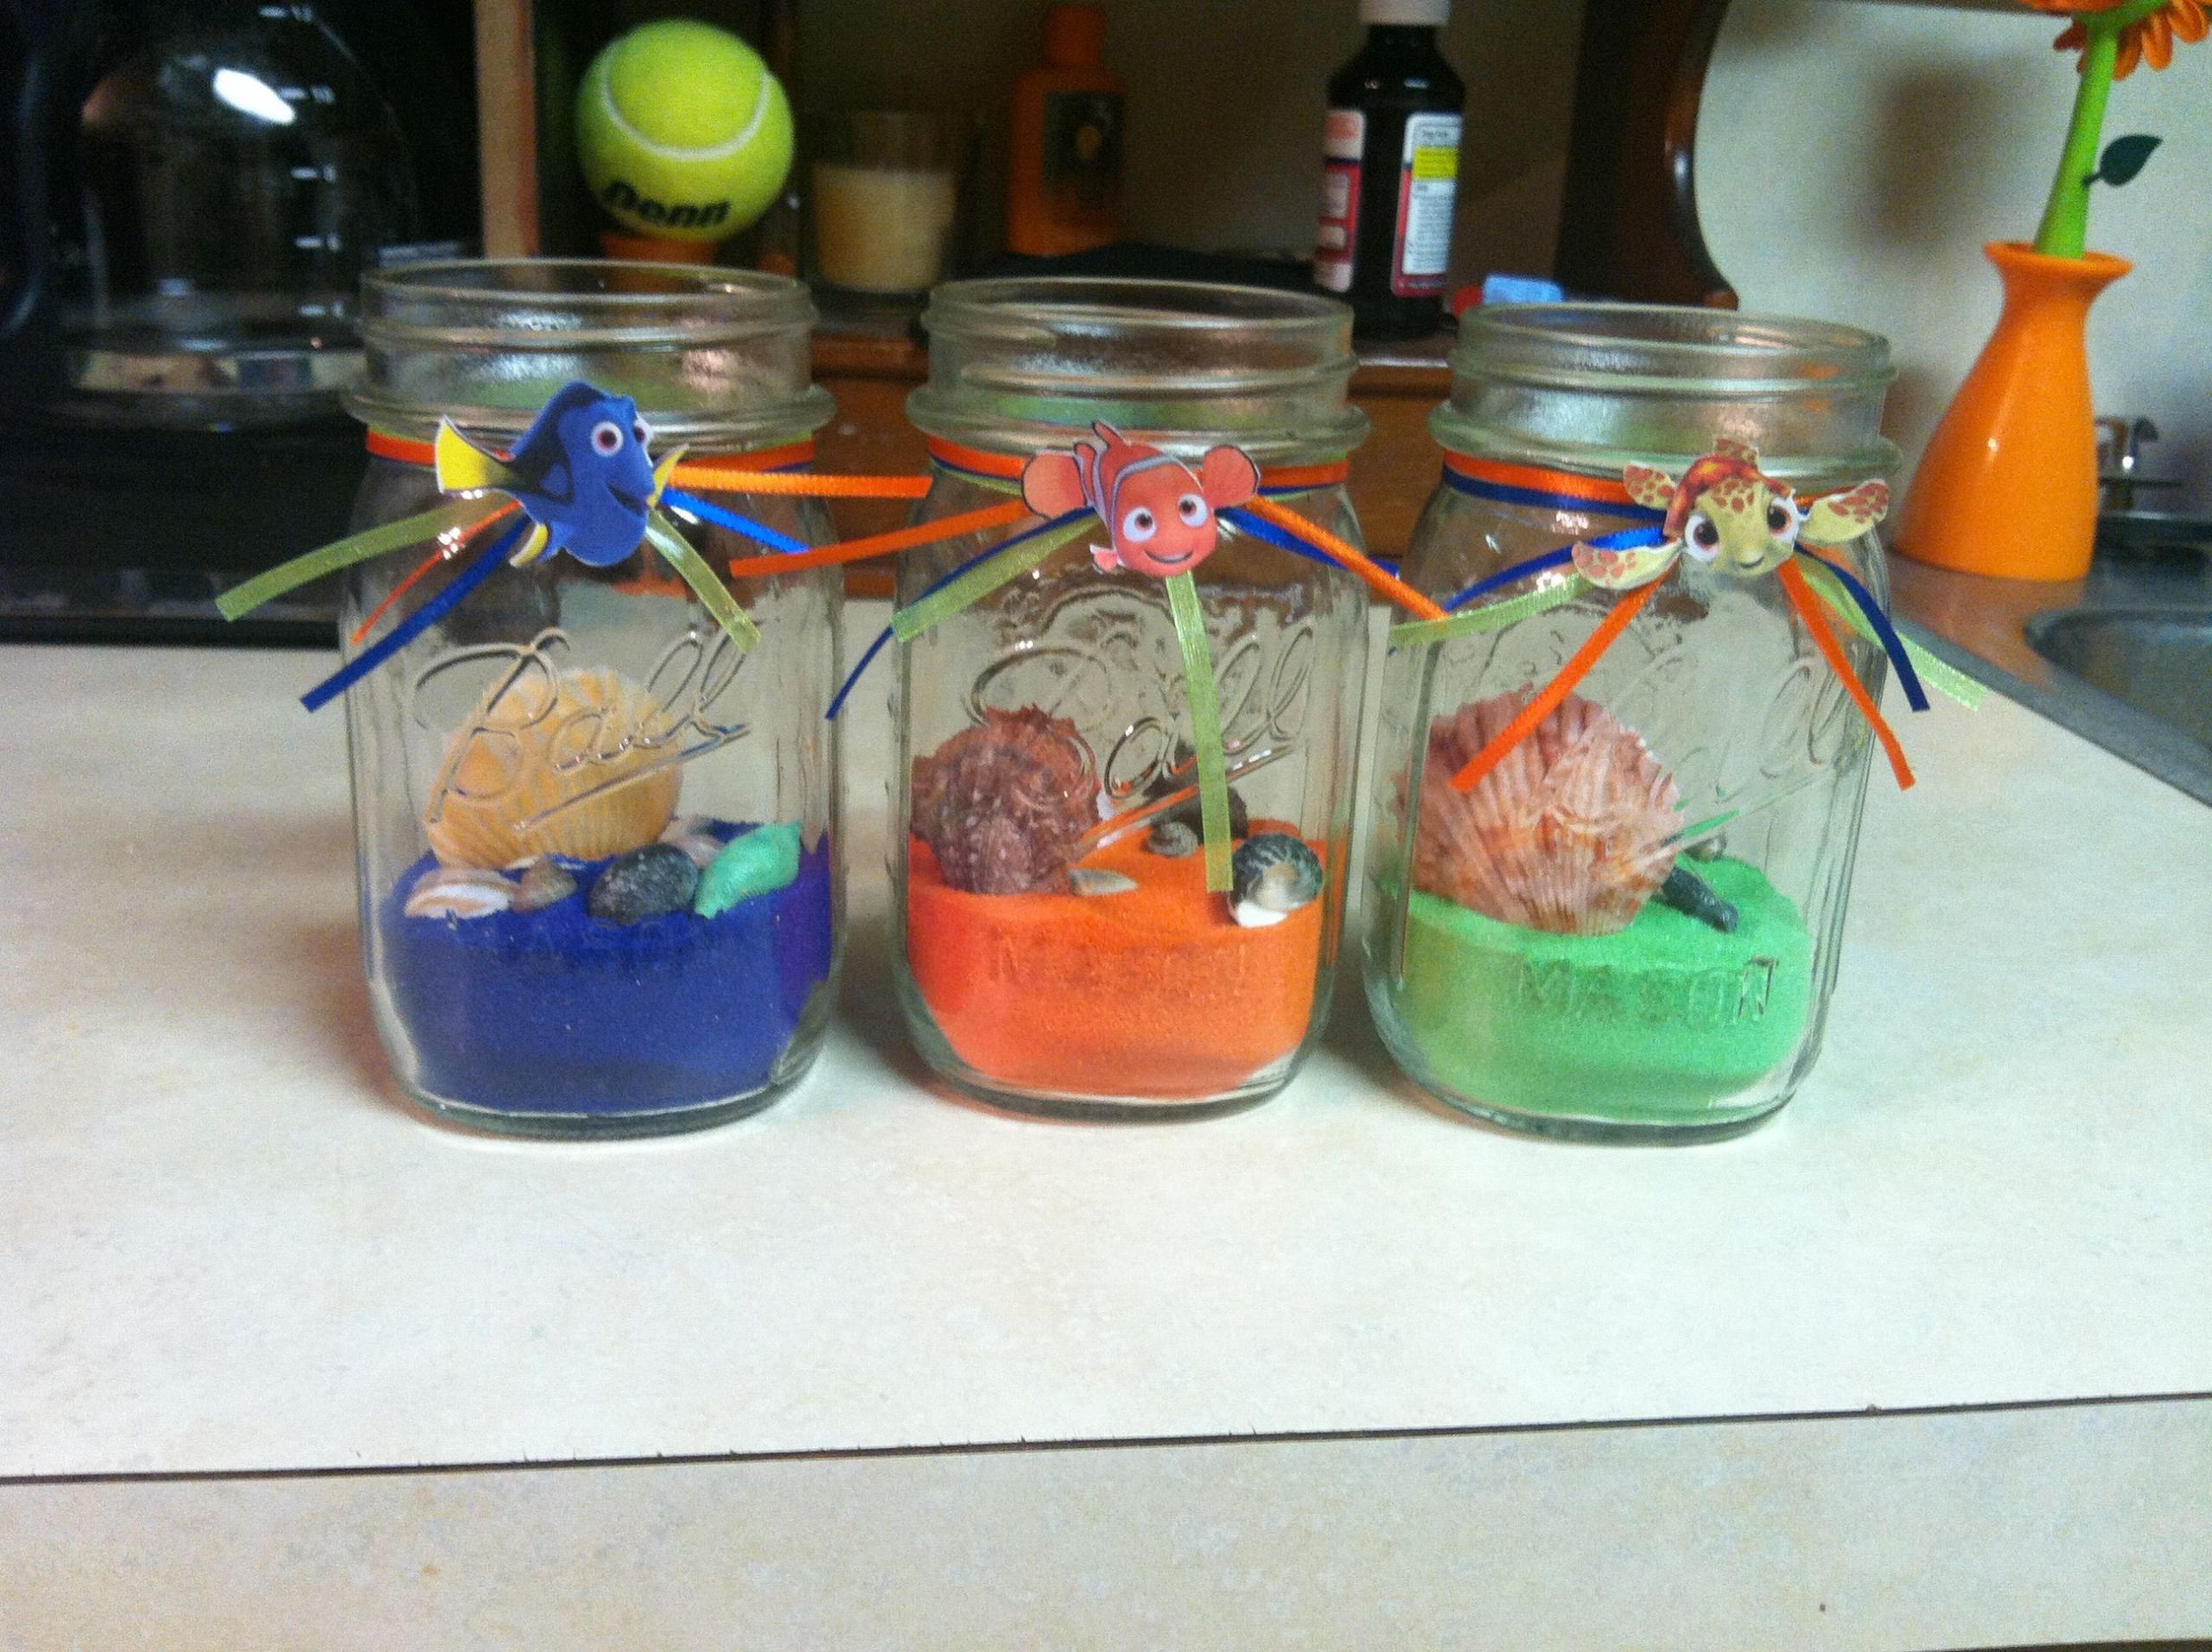 Finding Nemo Birthday Decorations
 DIY Finding Nemo Party Decorations These Are The es I